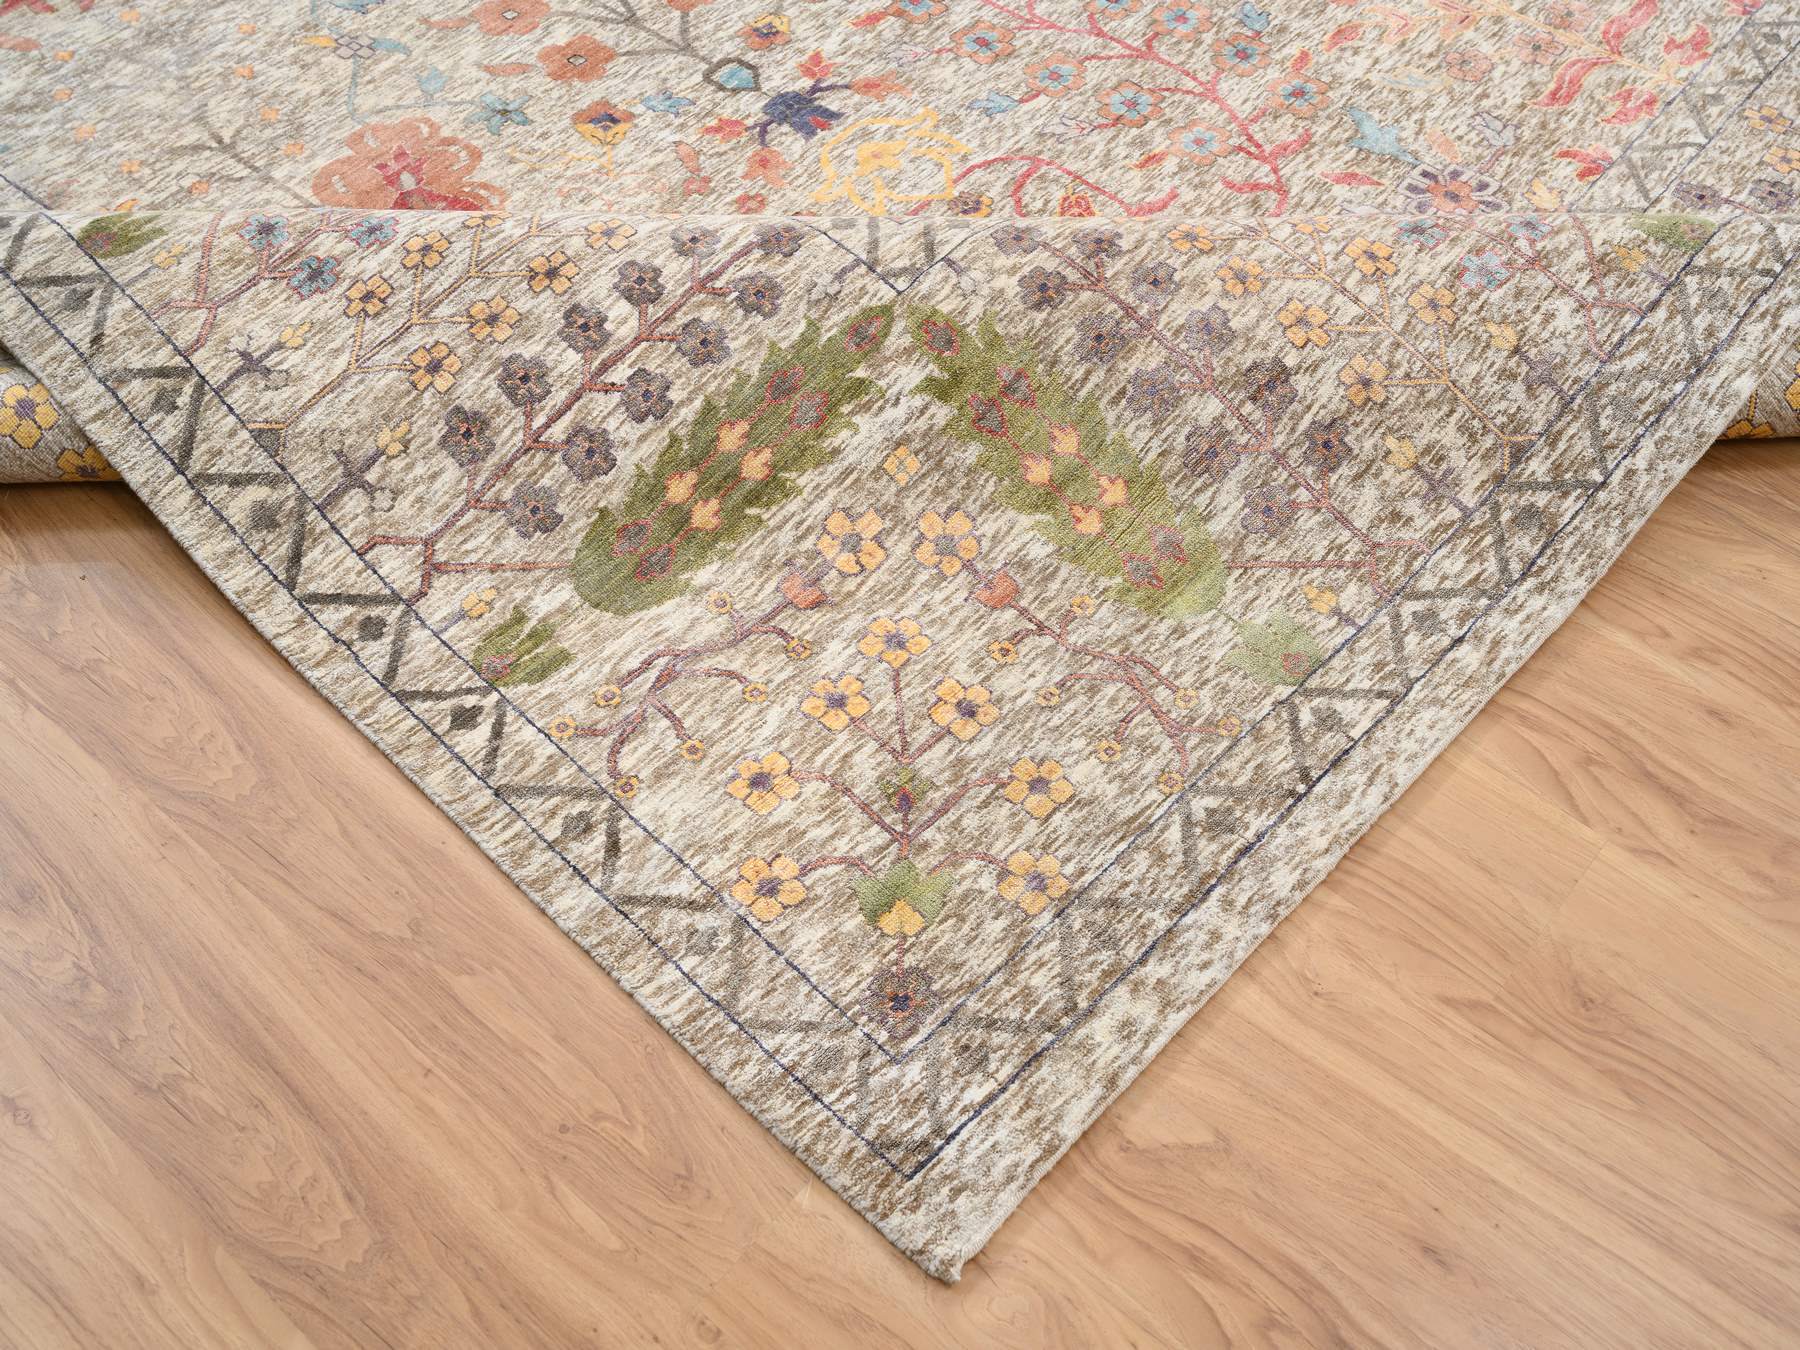 Transitional Rugs LUV580041